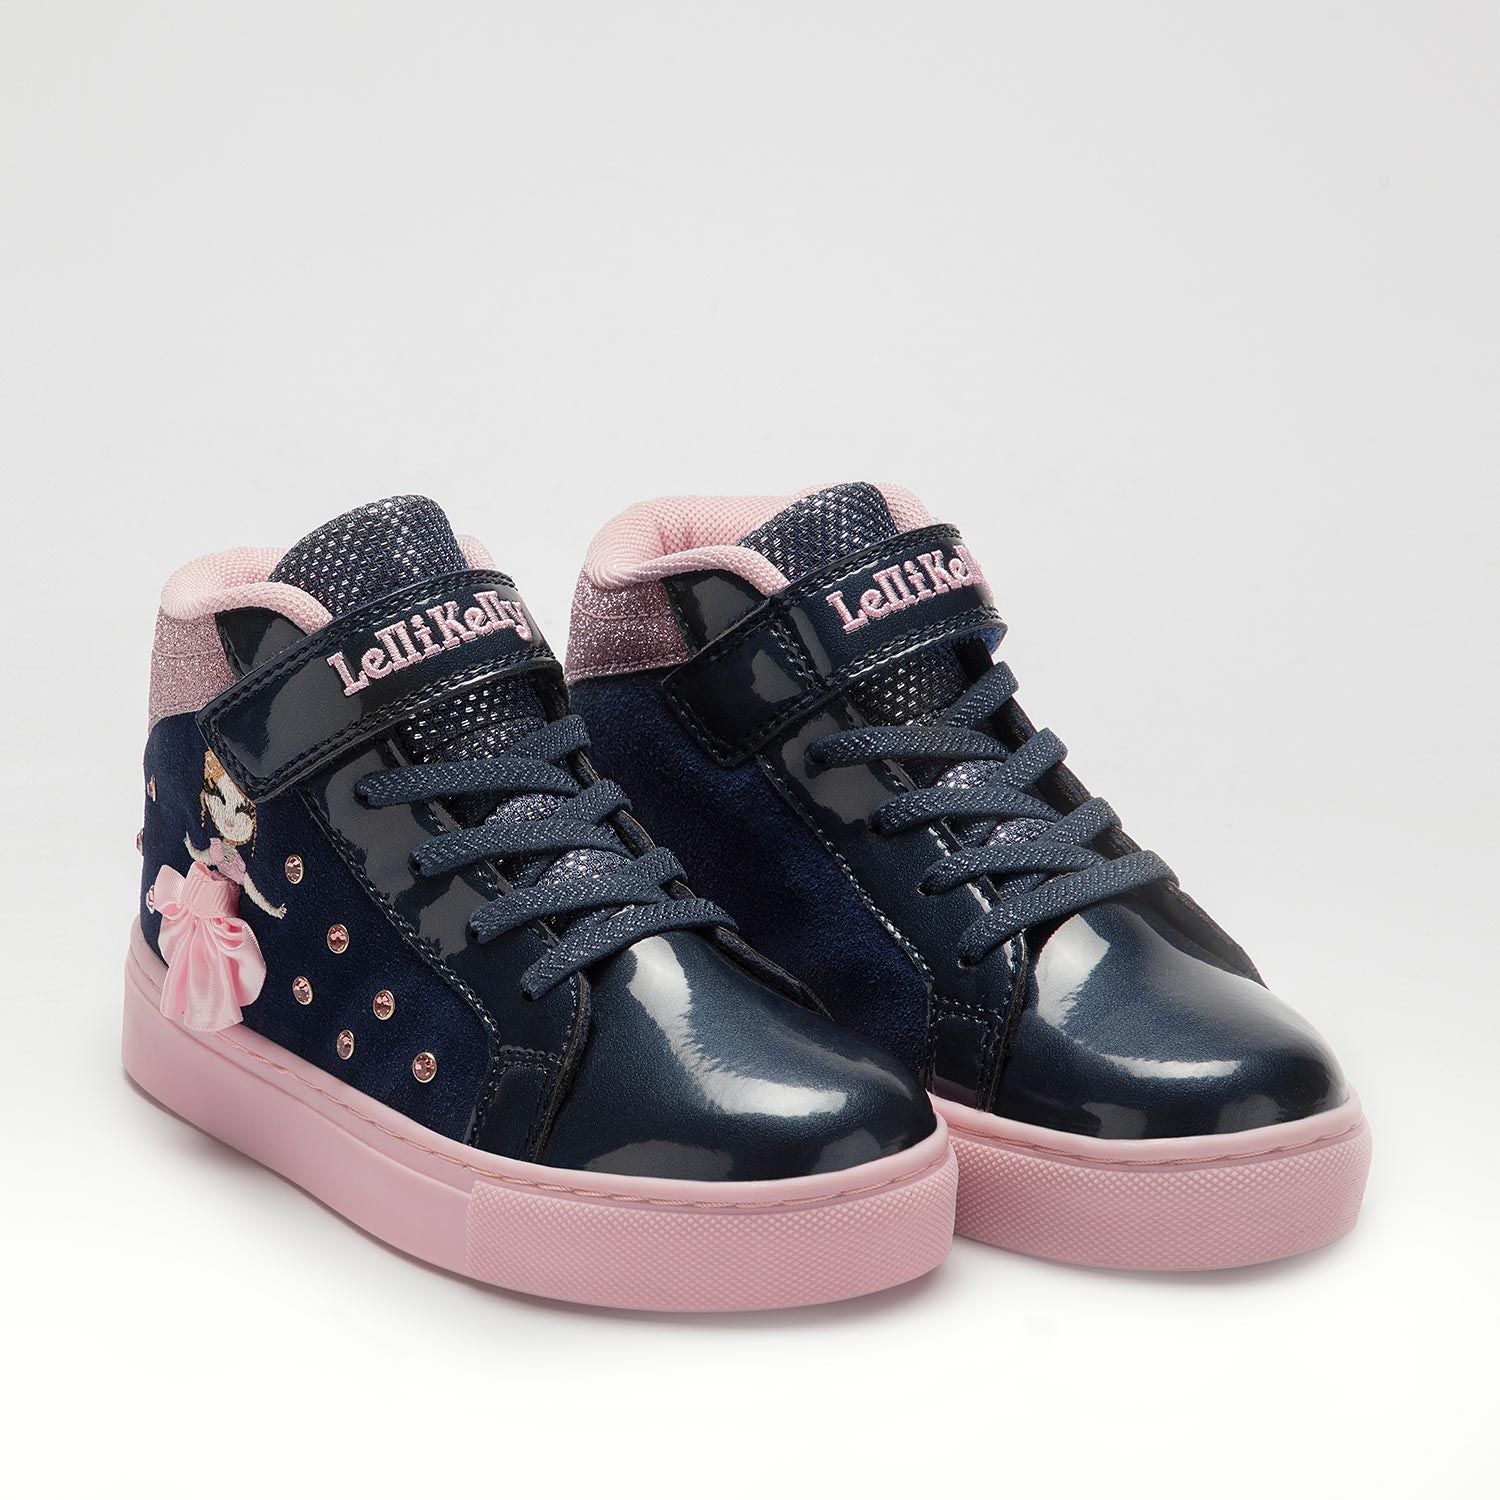 A pair of girls hi top trainers by Lelli Kelly, style Mille Stelle, in navy and pink suede with faux lace and velcro fastening. Angled view.